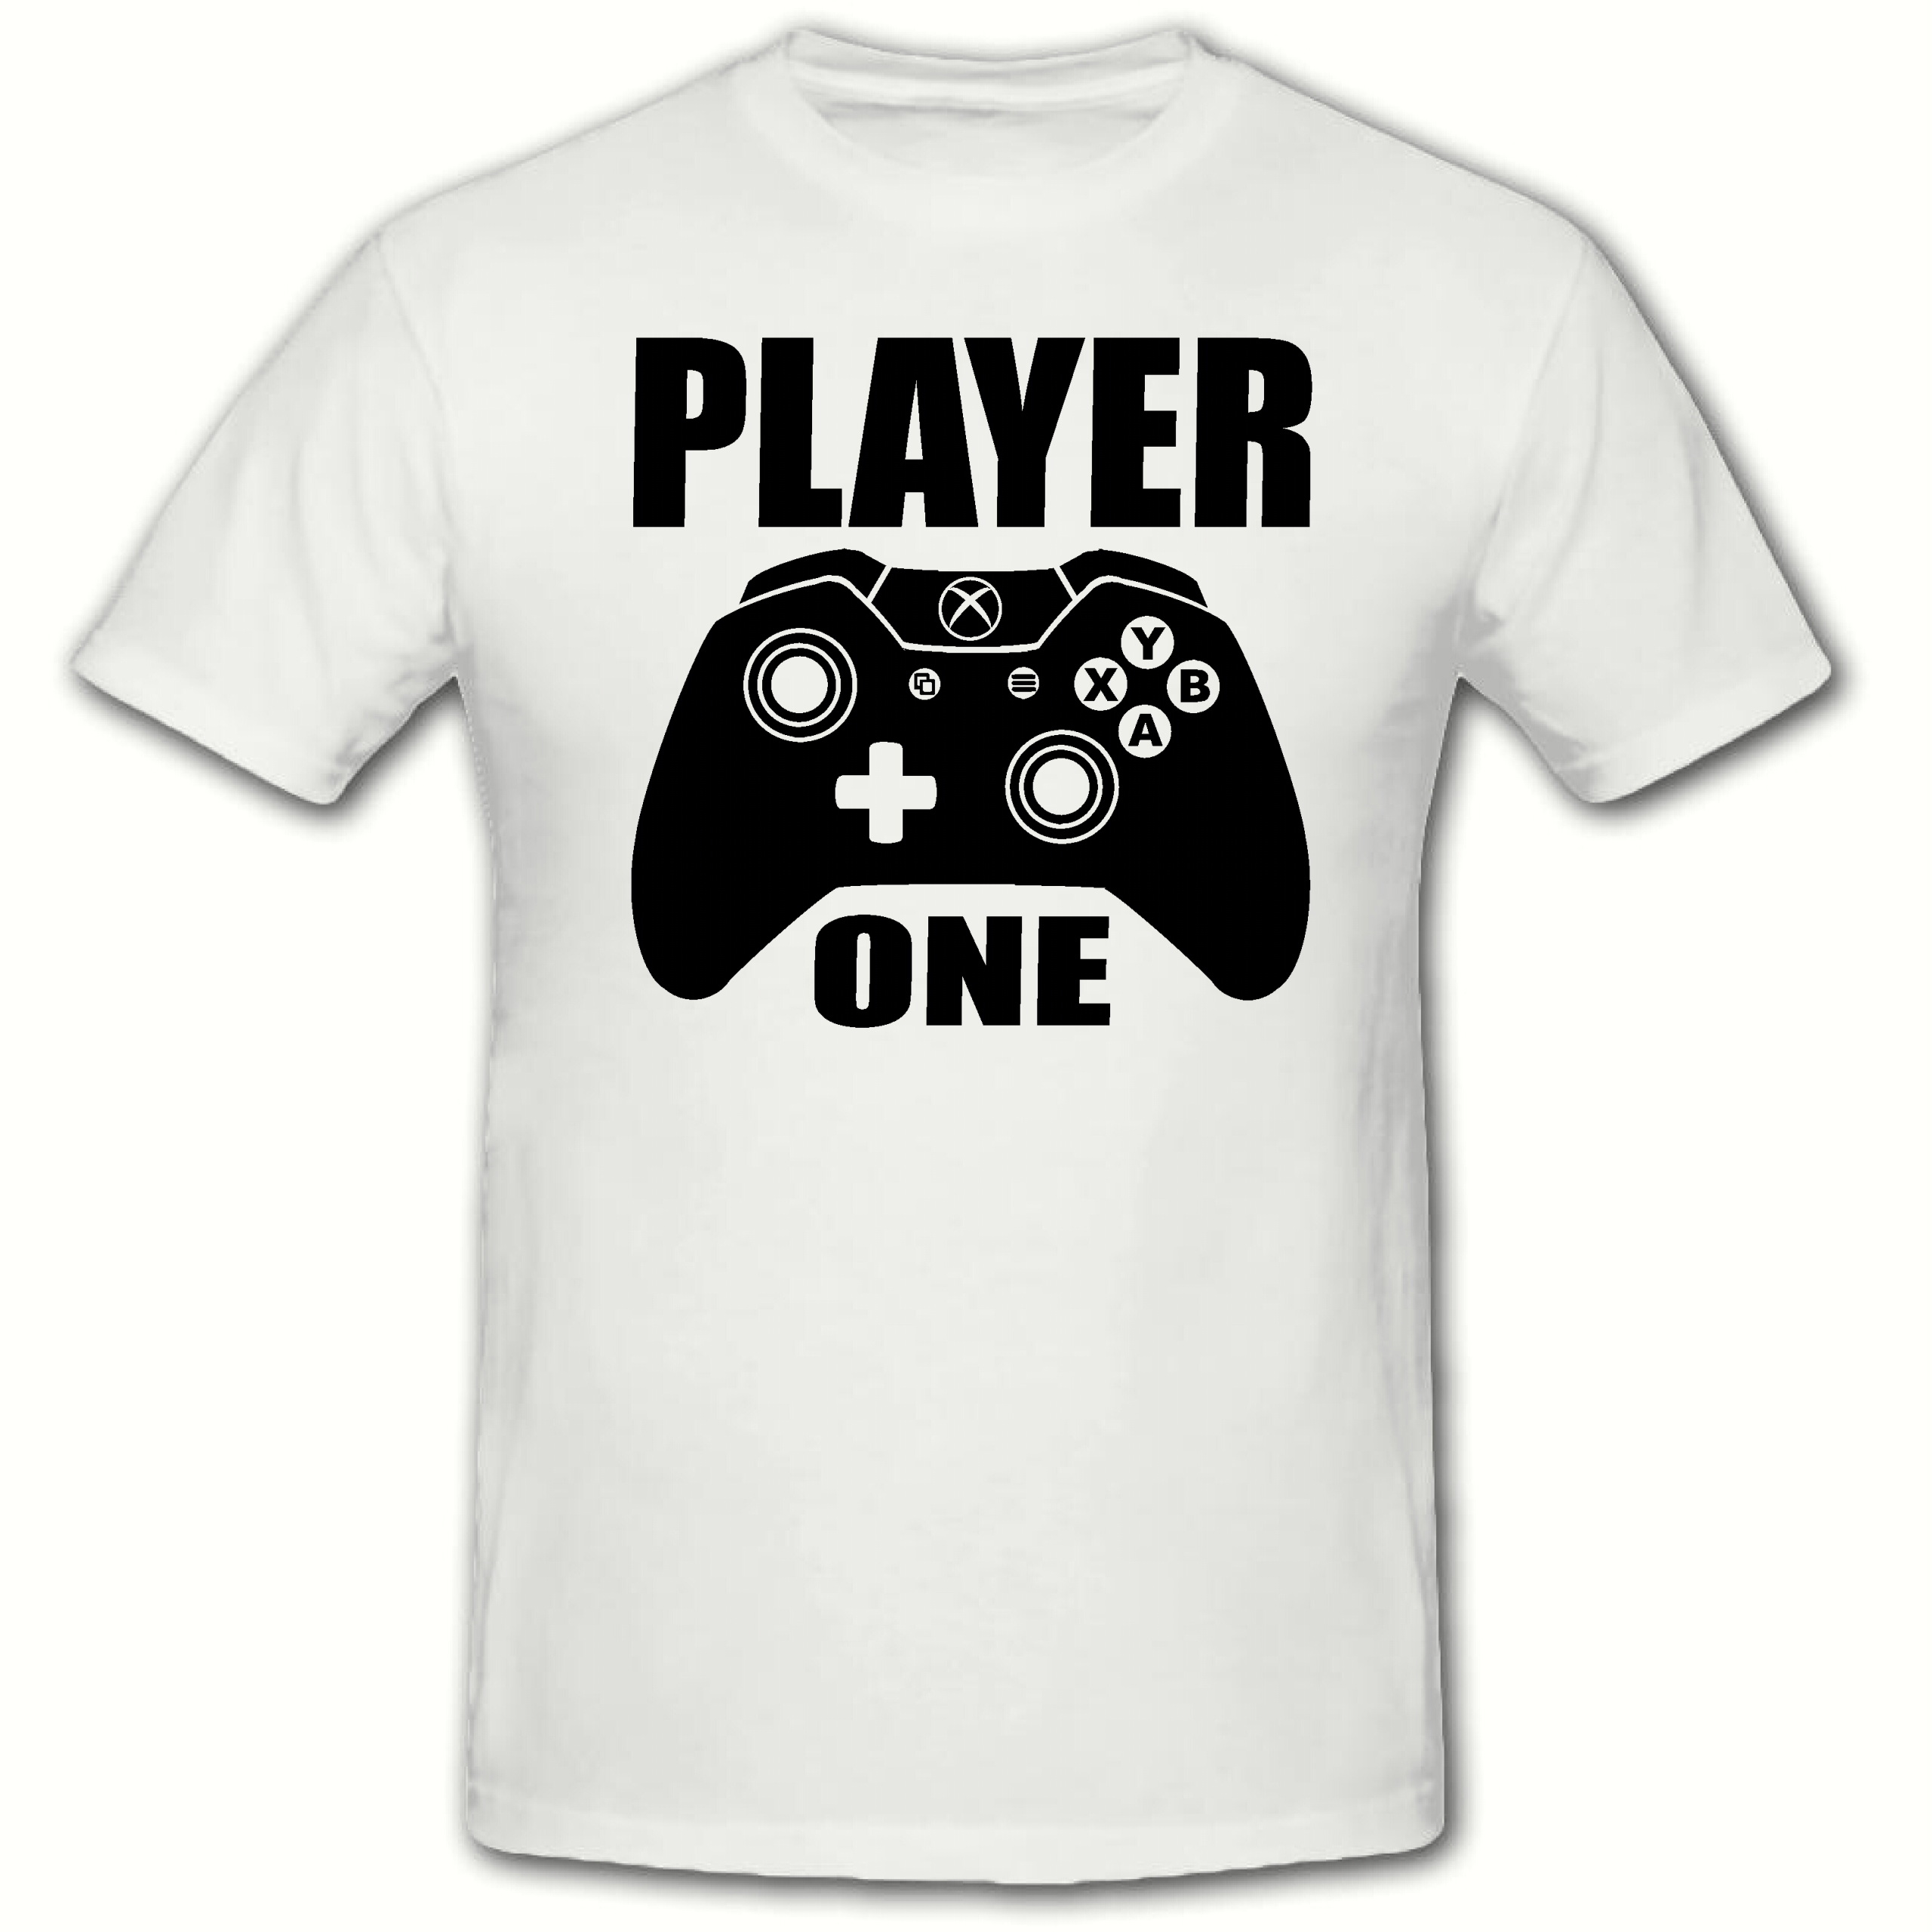 PLAYER ONE MENS T SHIRT